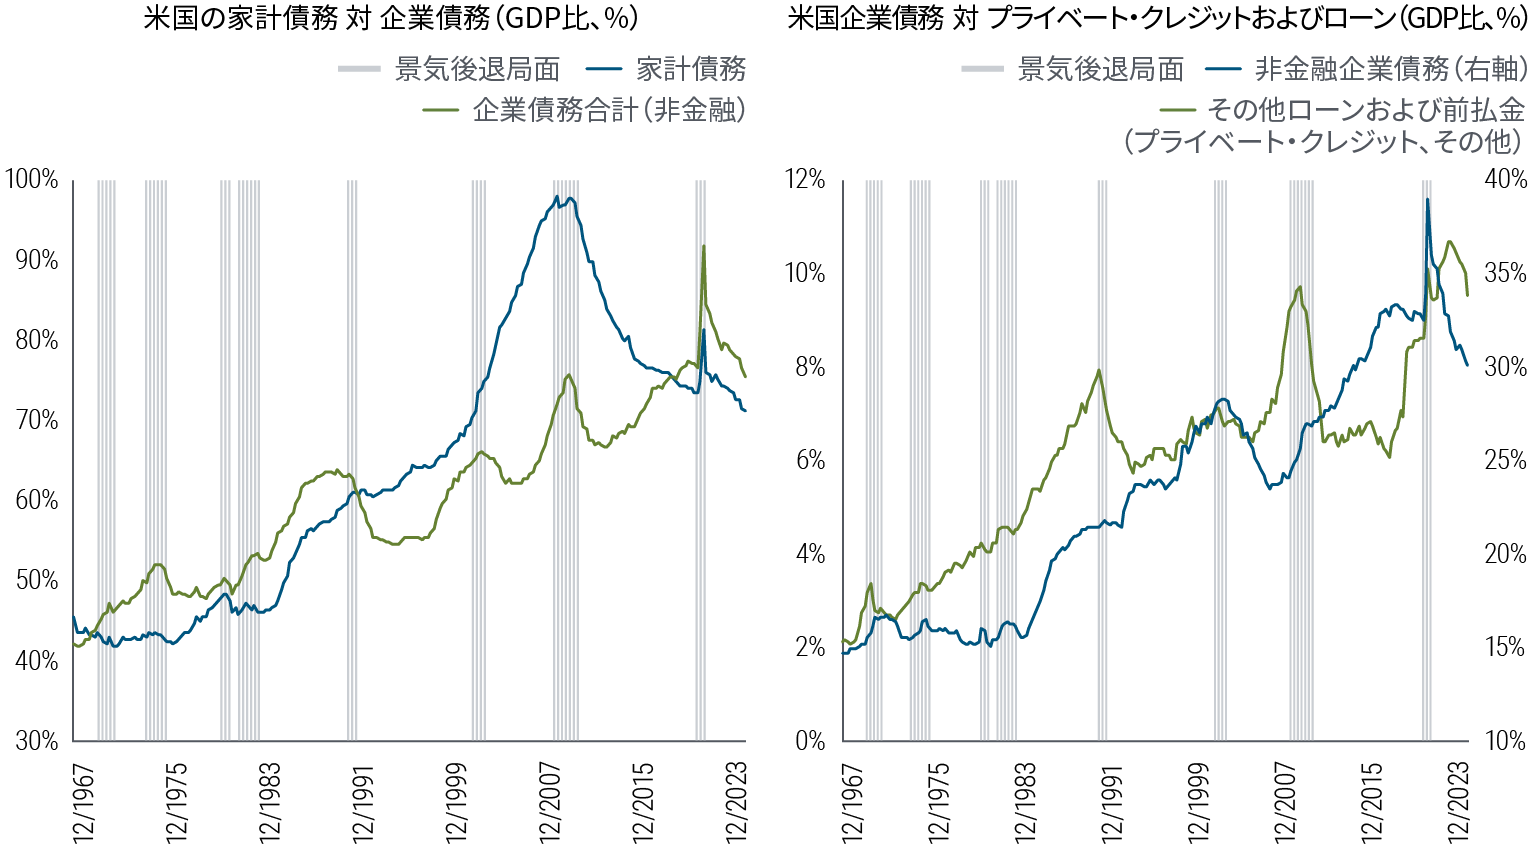 Figure 4 includes two line charts showing data from December 1967 through December 2023. The first chart shows two measures of debt – U.S. households and U.S. businesses (nonfinancial) – as a percentage of U.S. GDP. In that time frame, the household debt ratio peaked in 2008 and 2009 at 97%, then dropped to 74% in 2019, spiked briefly amid the pandemic to 82% in 2020, and has since fallen to 71%. The business debt ratio peaked amid the pandemic at 92% and has since fallen to 76%. The second chart shows two other measures – U.S. private credit and bank loans (proxied by the other loans and advances category in the Federal Reserve Flow of Funds data) and nonfinancial corporate debt – as a percentage of U.S. GDP. In the same time frame, private credit peaked at 10% in 2022, and now stands at 9%. Nonfinancial corporate debt peaked at 38% in 2020, and now stands at 30%. In both charts, periods of U.S. recession are indicated by shaded areas. Source: Federal Reserve Flow of Funds data, Haver Analytics, PIMCO calculations.